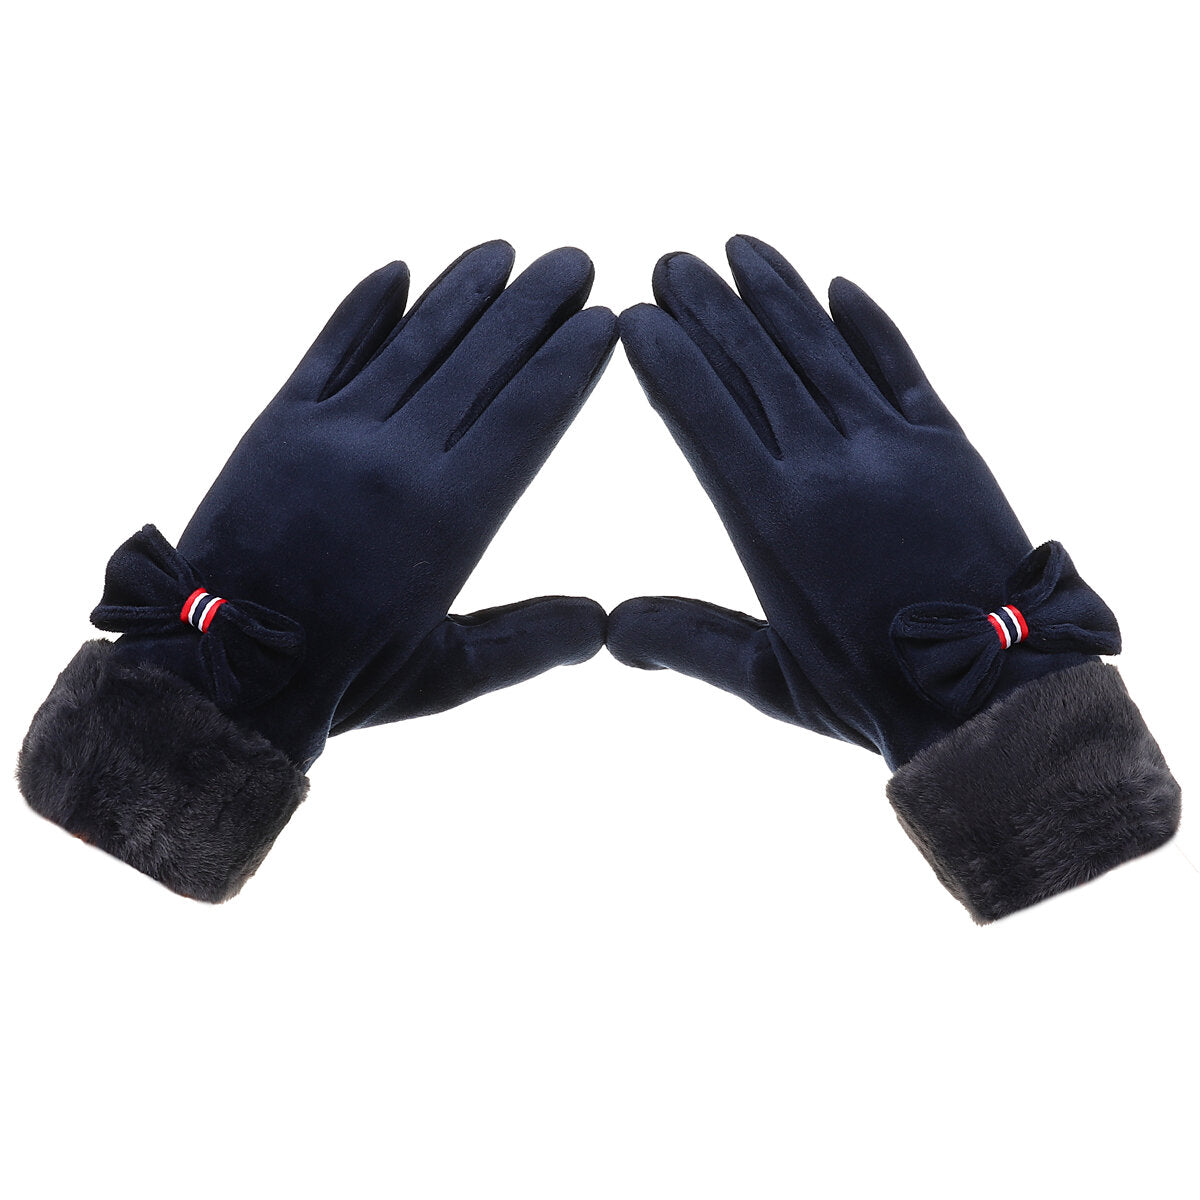 Winter Warm Gloves Touch Screen Windproof Riding Skiing Outdoor Sports Gloves